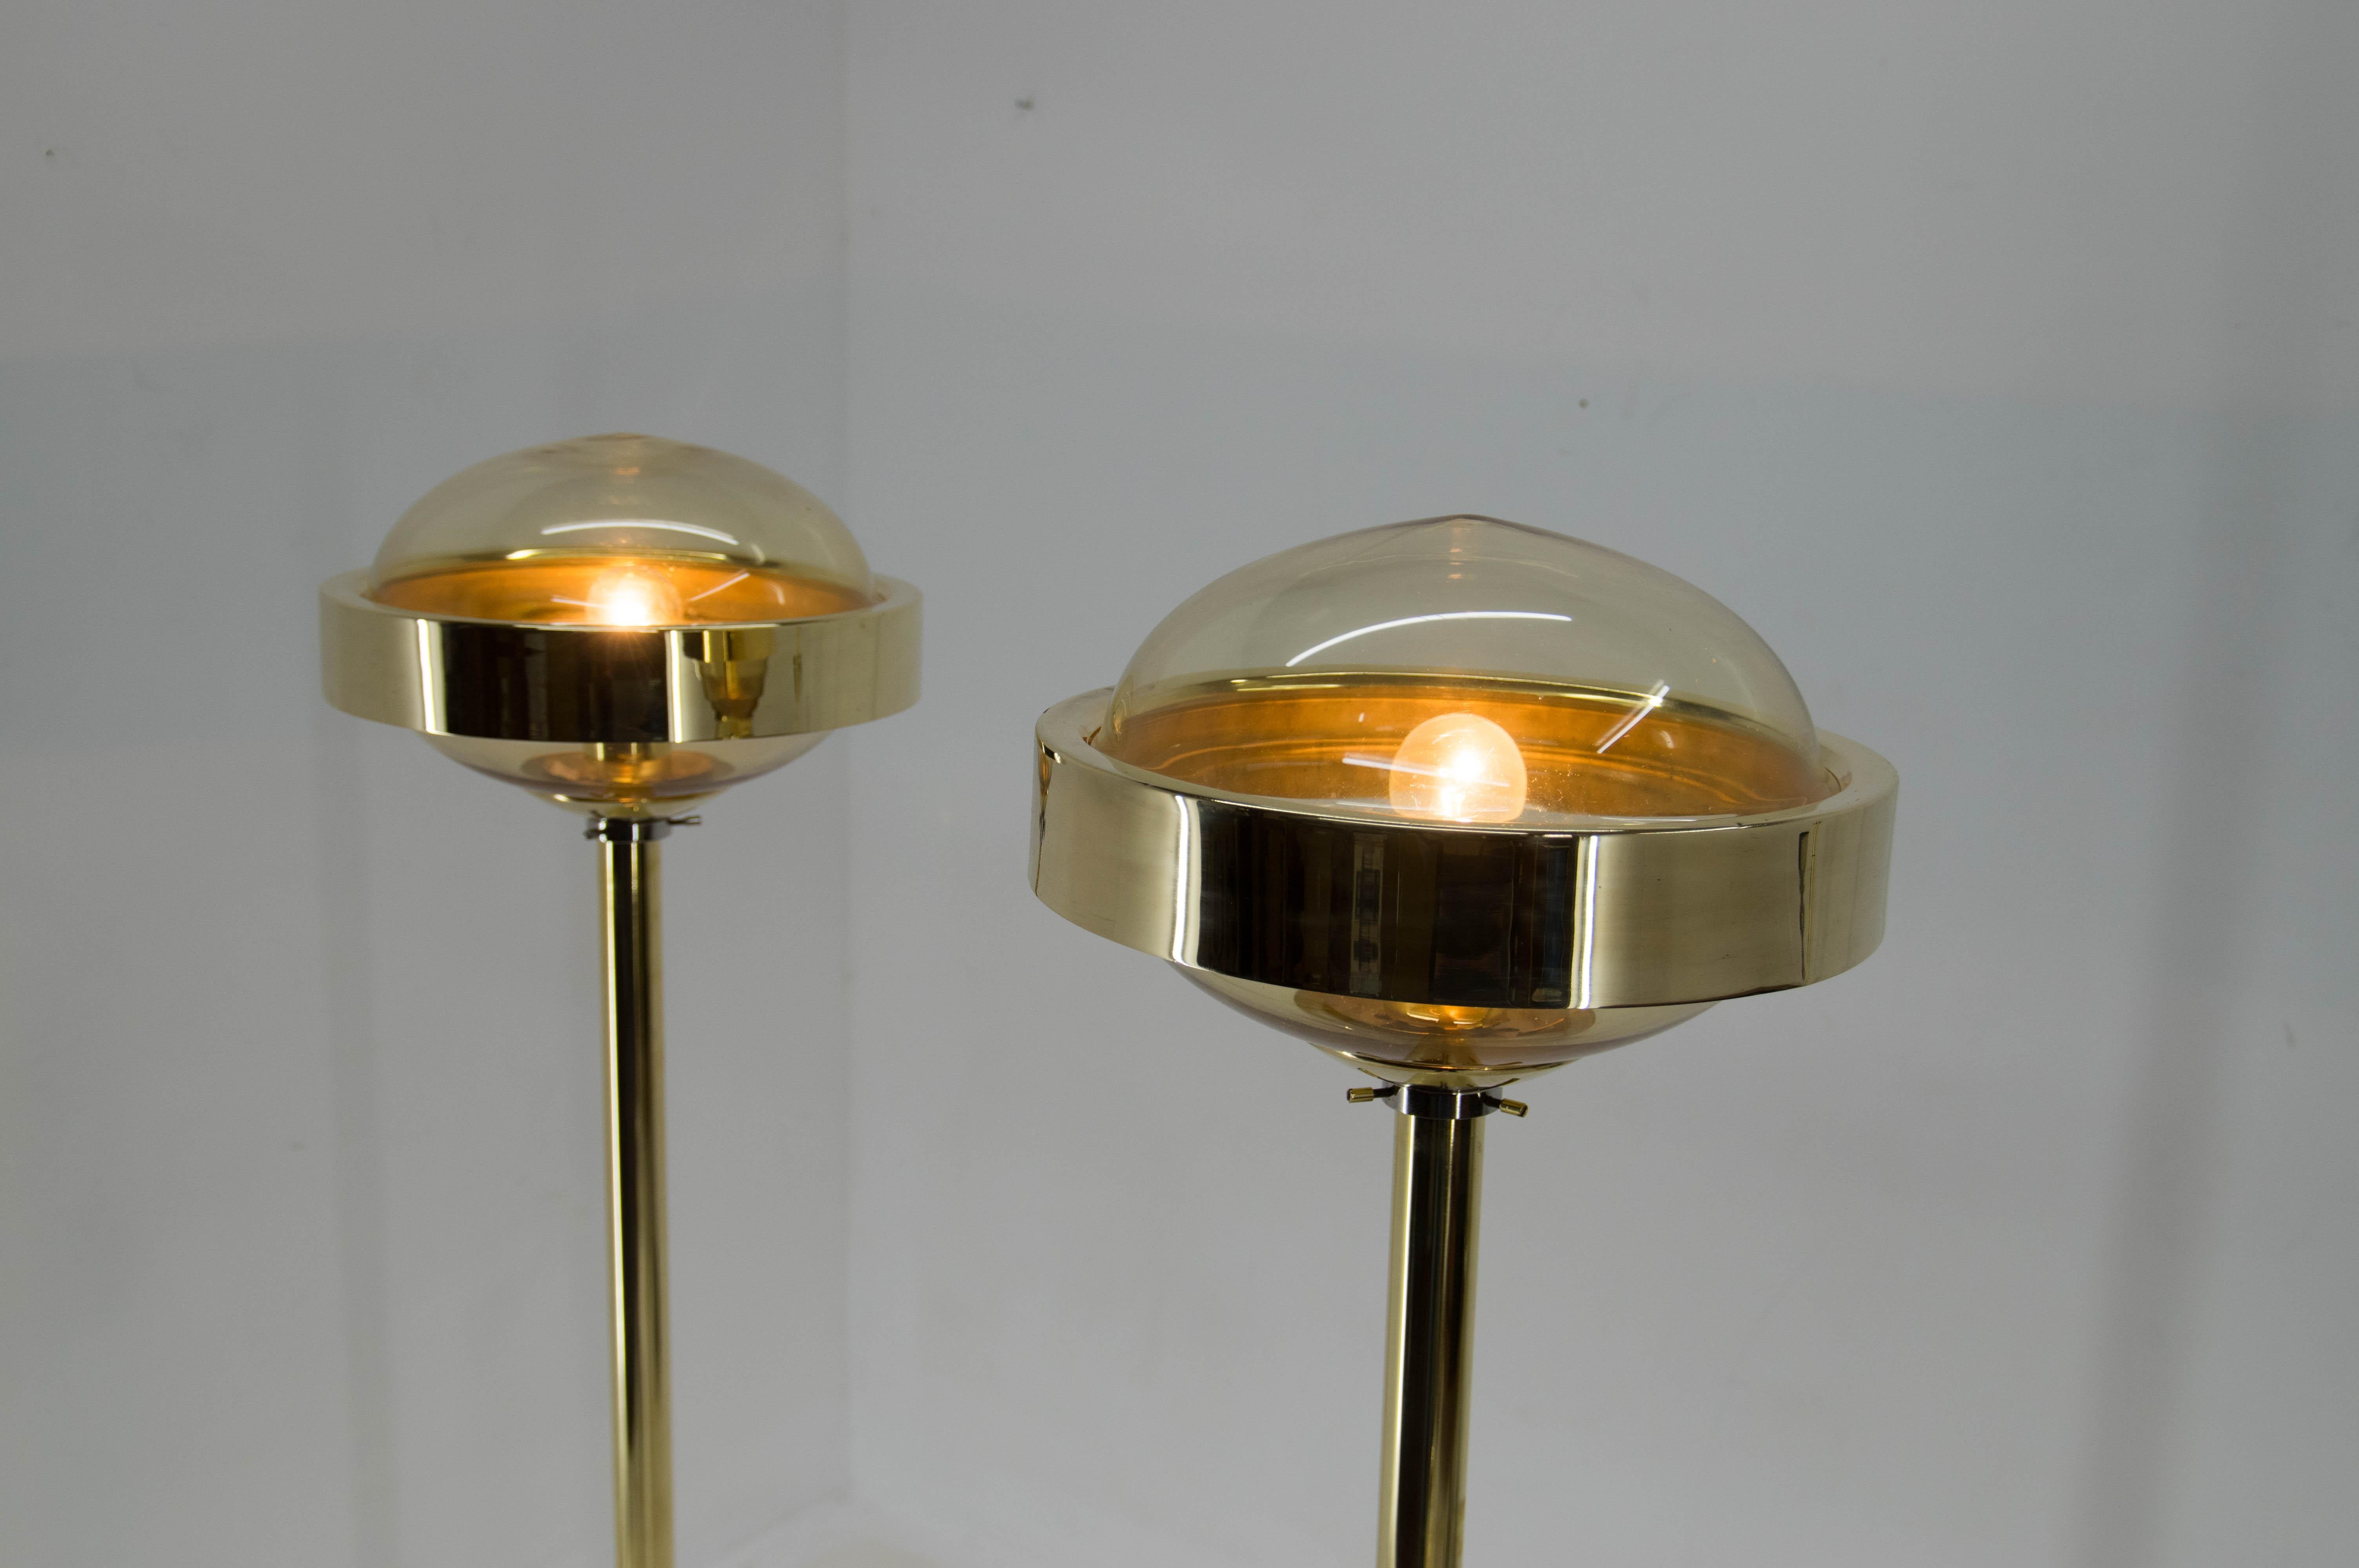 Set of two floor lamps made of brass and smoke glass. 
Made by Preciosa, Kamenicky Senov in Czechoslovakia in 1970s
Restored: brass carefully polished
Rewired: 1x60W, E25-E27 bulb
US plug adapters included.
   